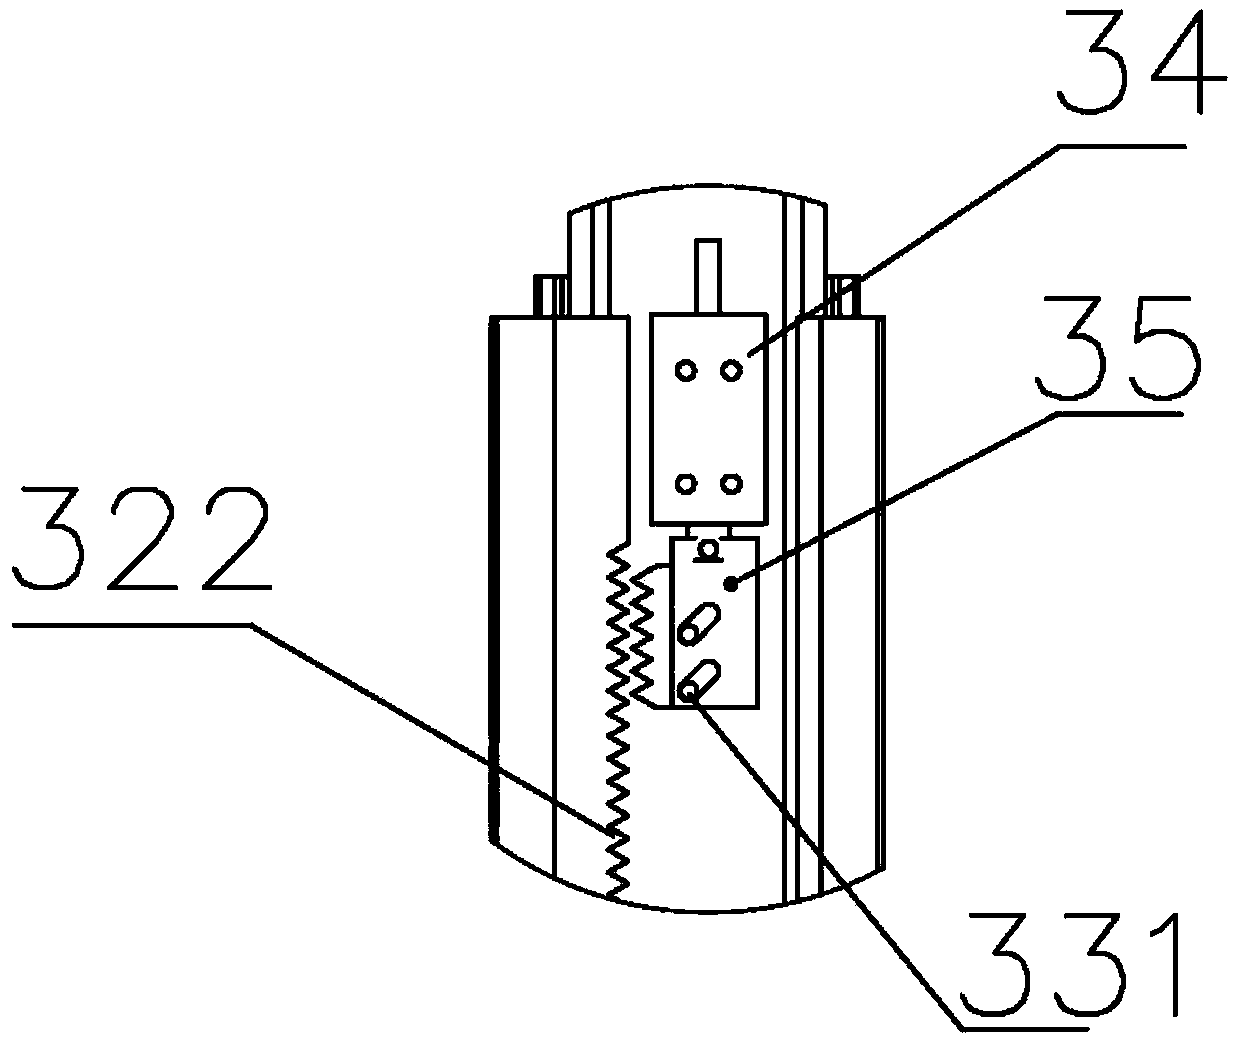 Handrail turntable mechanism of three-dimensional human body scanning device